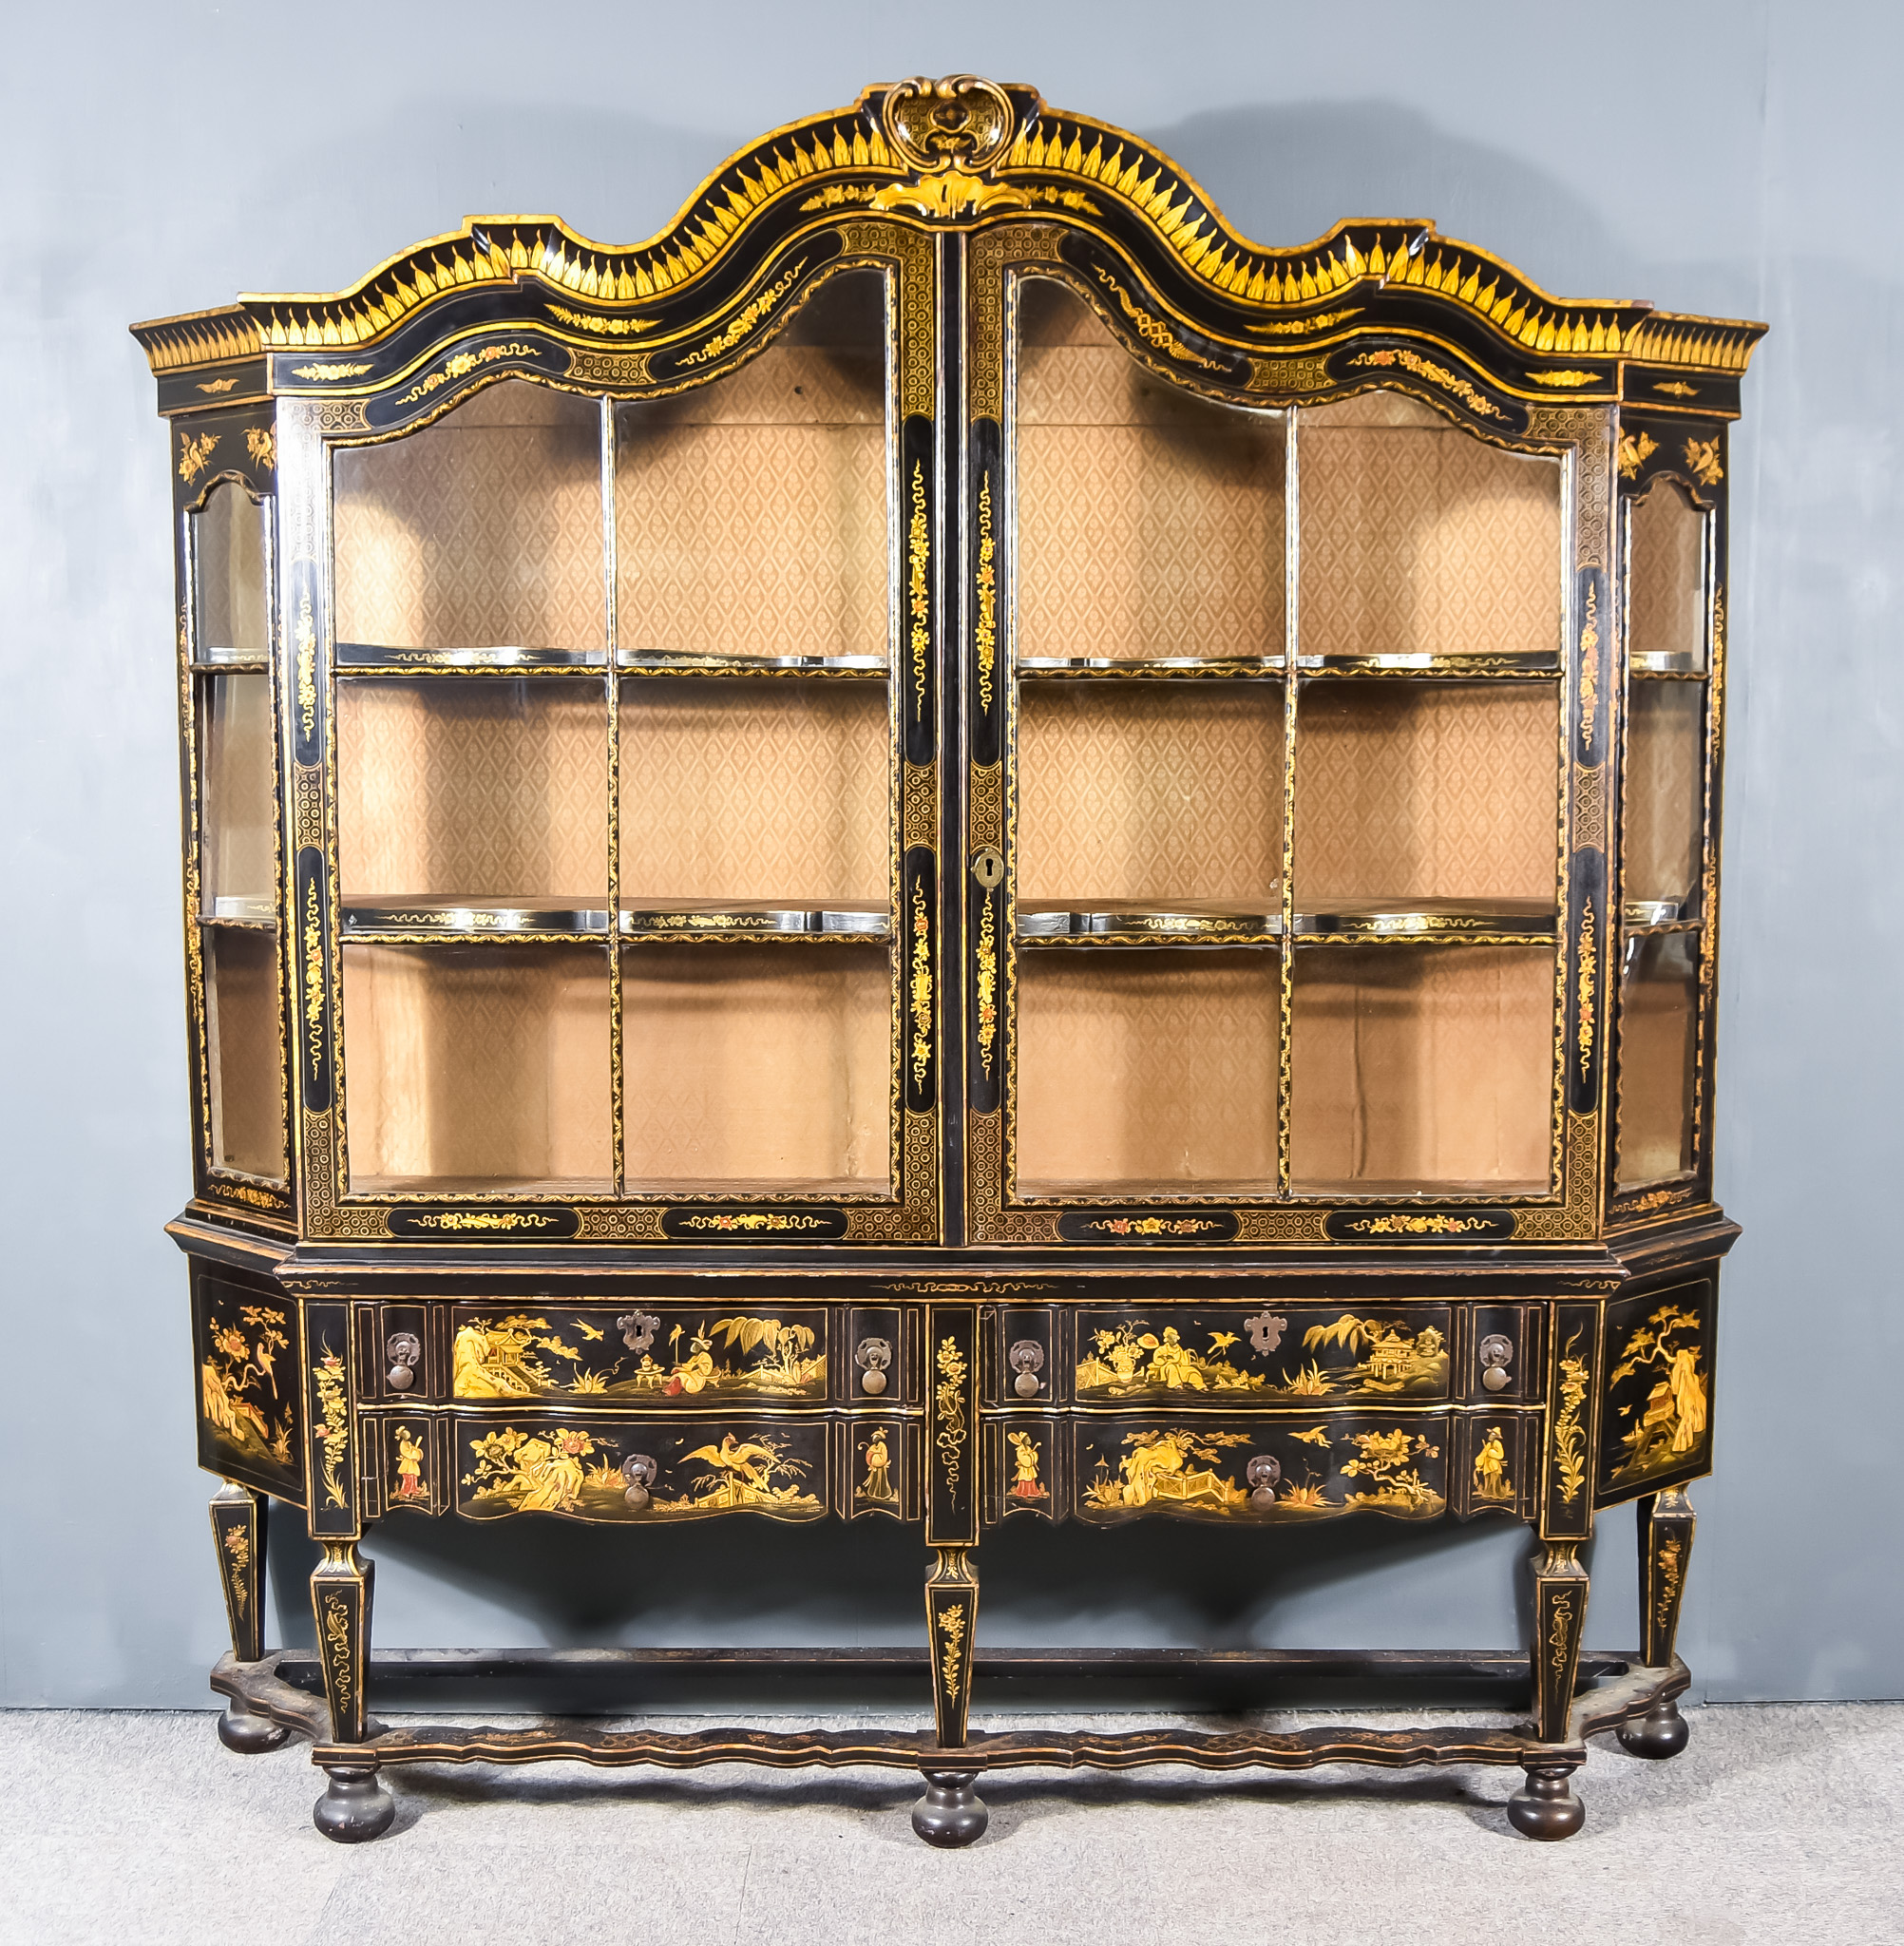 A Late 18th/Early 19th Century Black Lacquered Display Cabinet, the whole decorated with